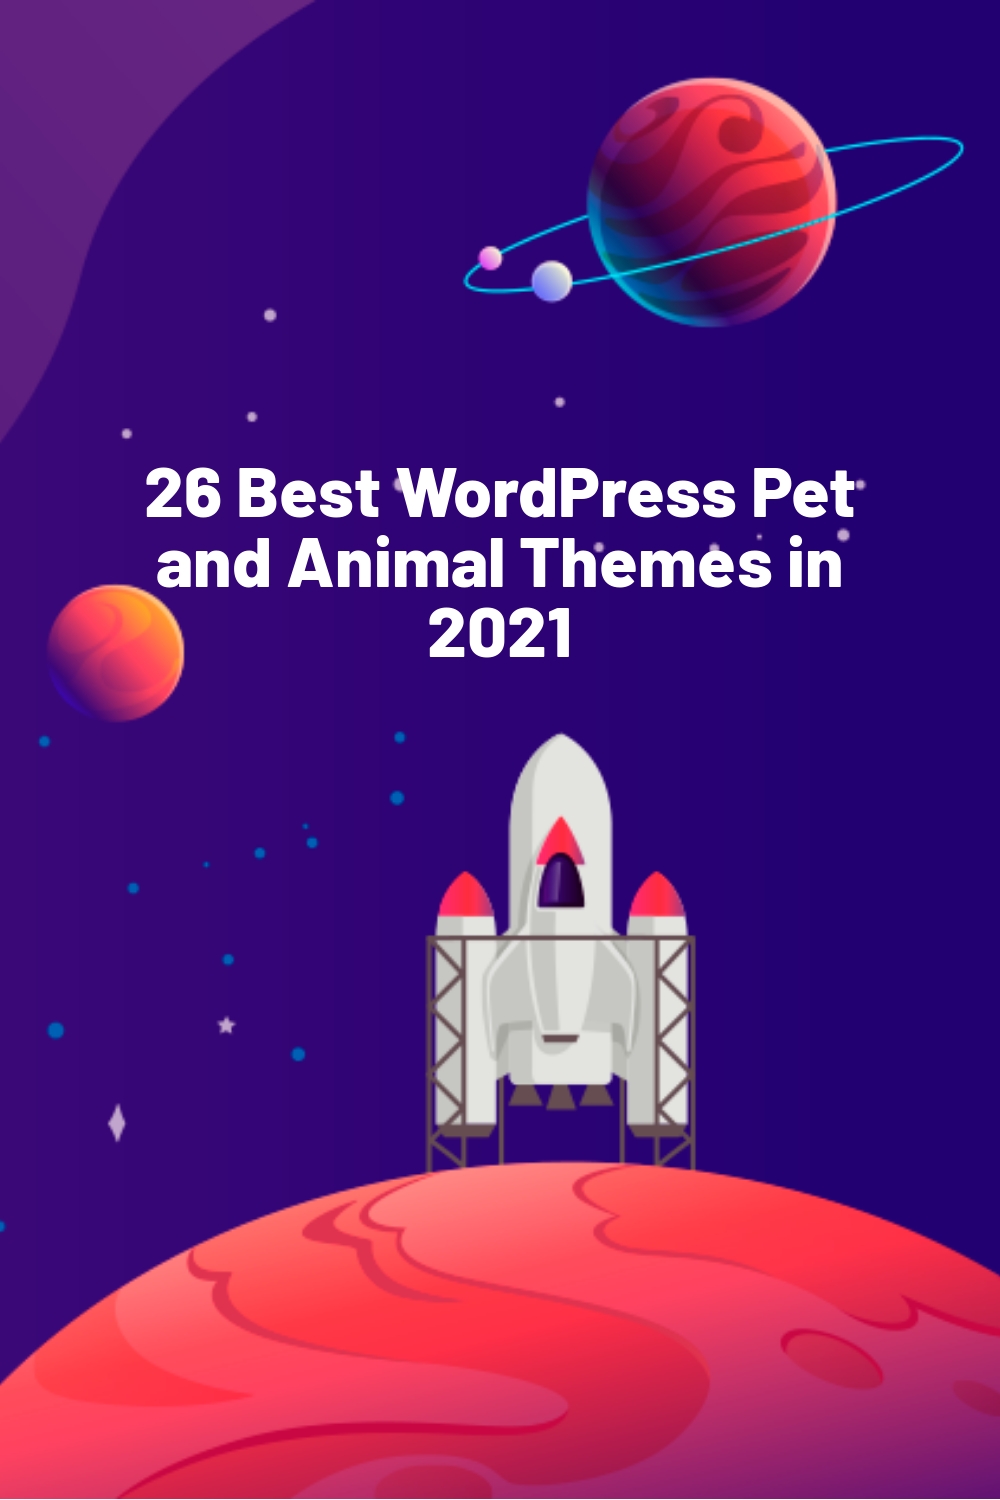 26 Best WordPress Pet and Animal Themes in 2021